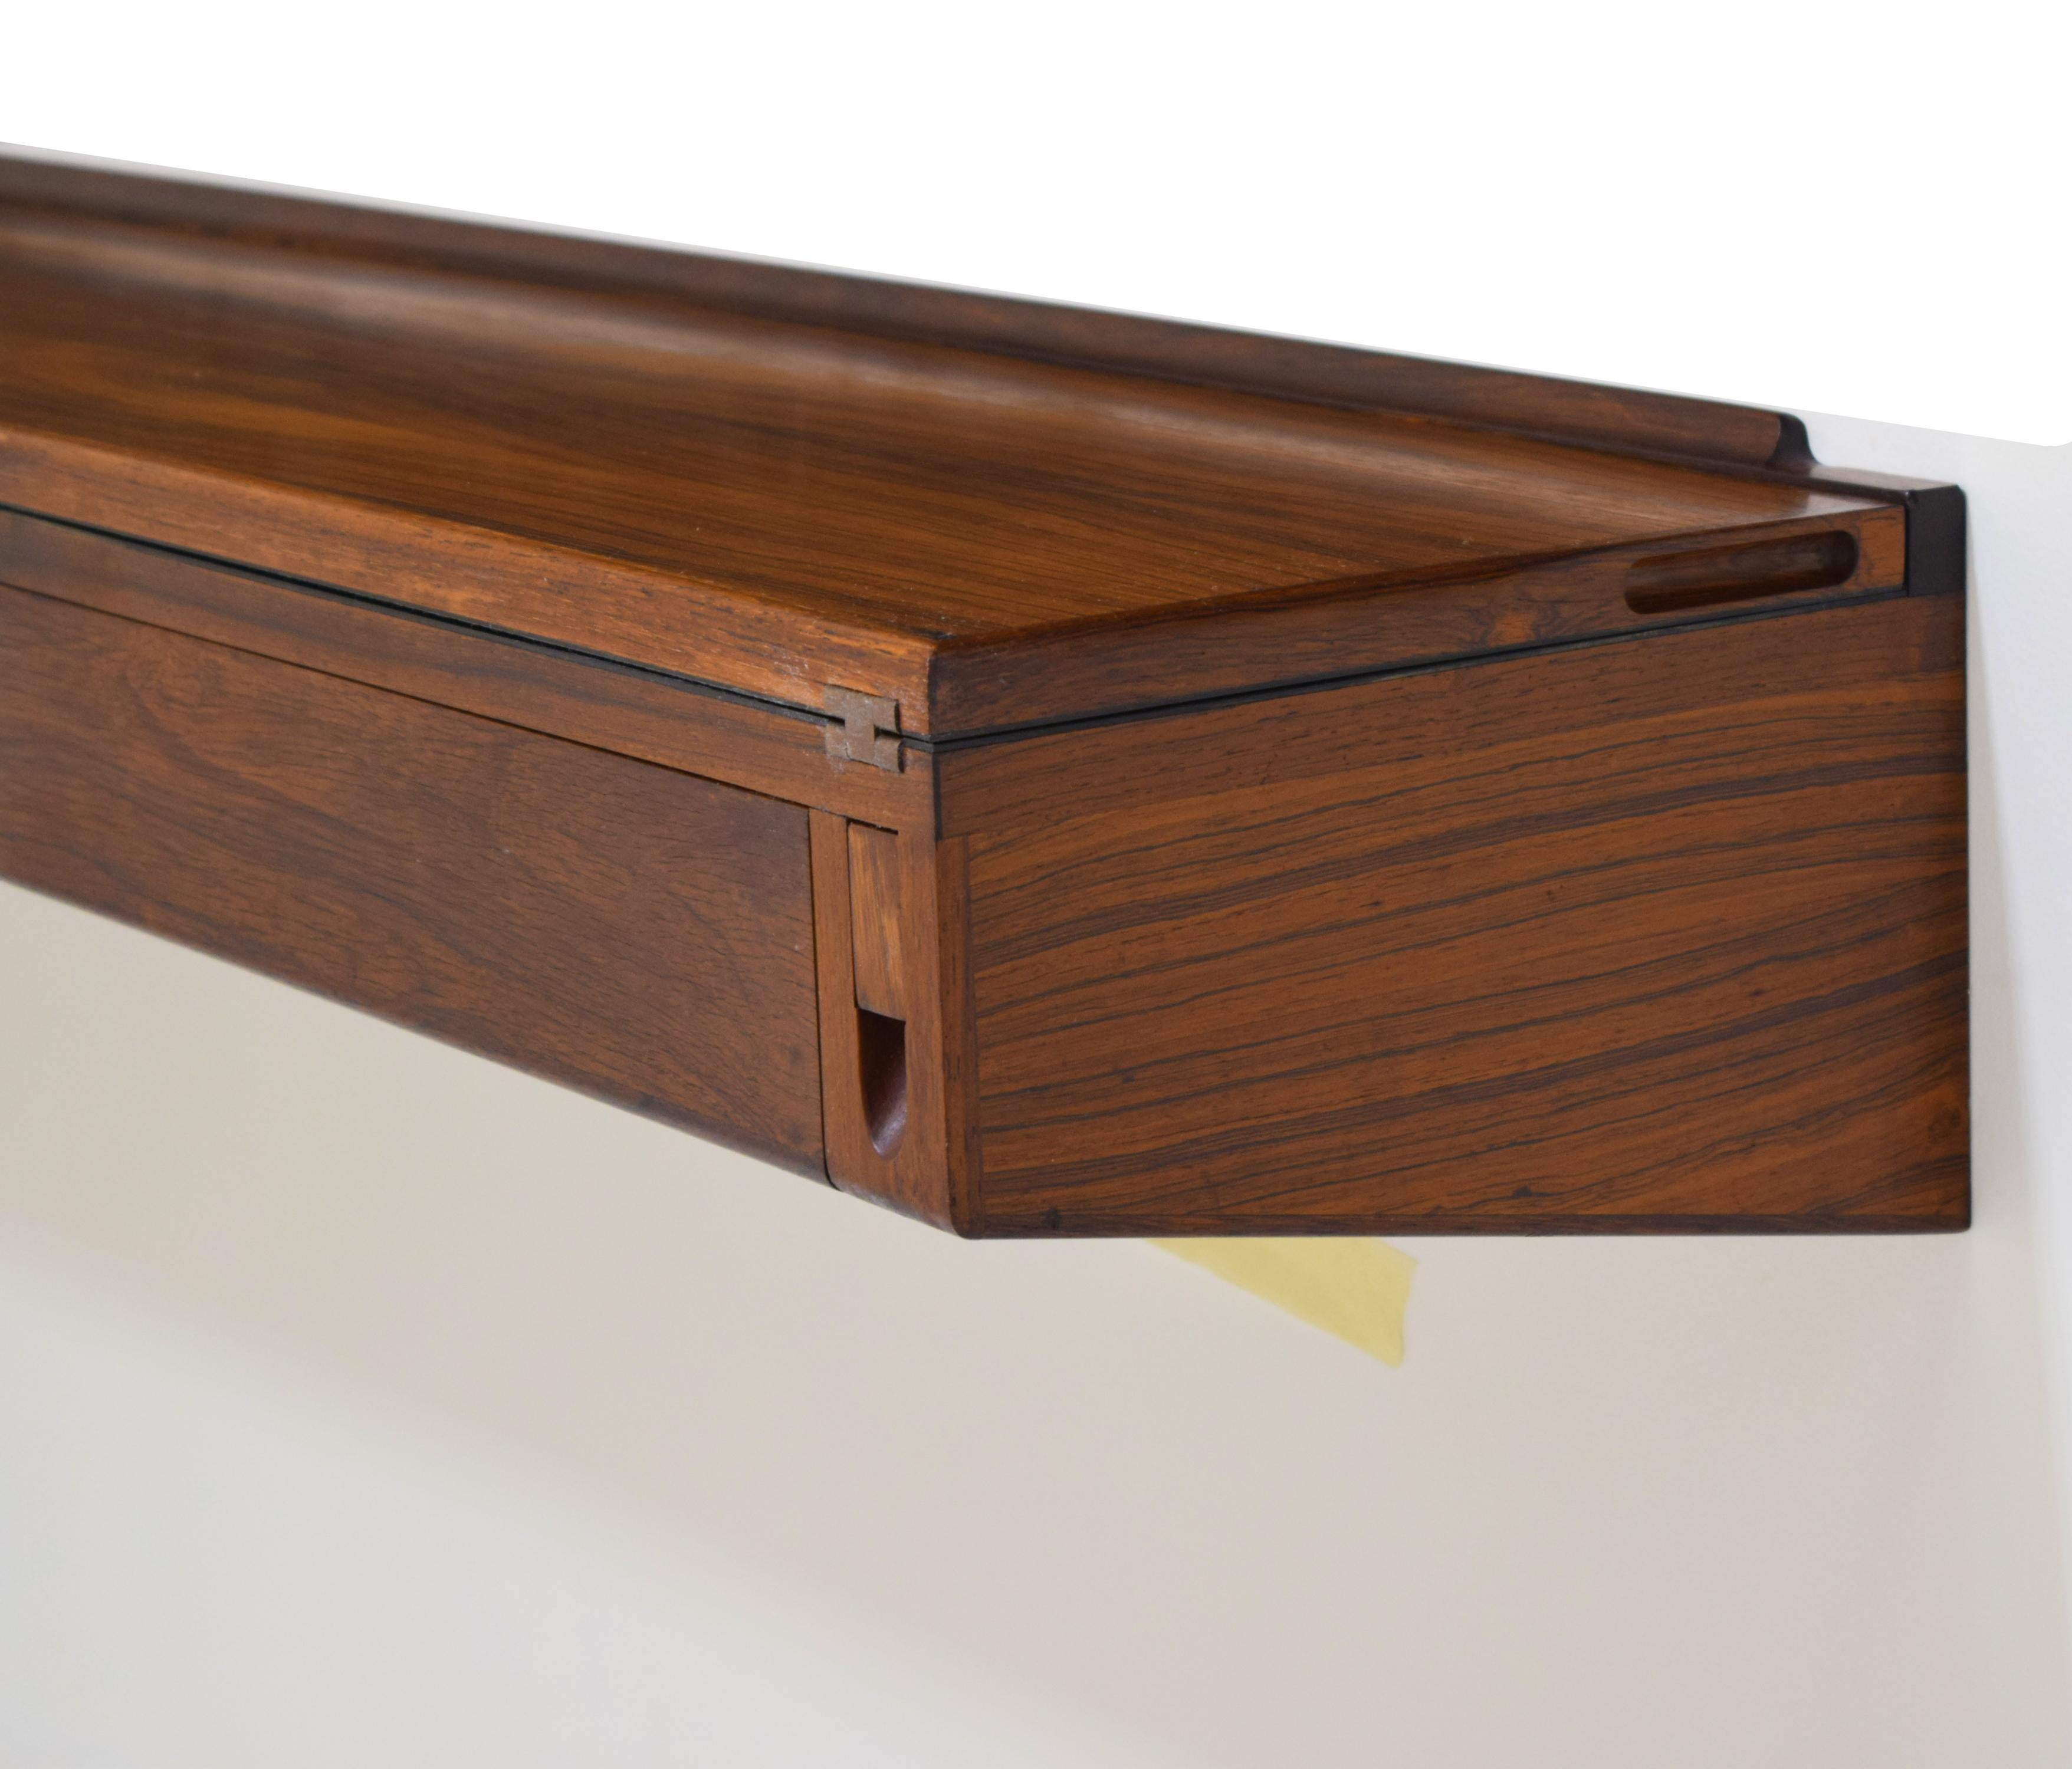 Mid-20th Century Wall-Mounted Rosewood Flip-Top Desk and Console by Arne Hovmand Olsen, Denmark